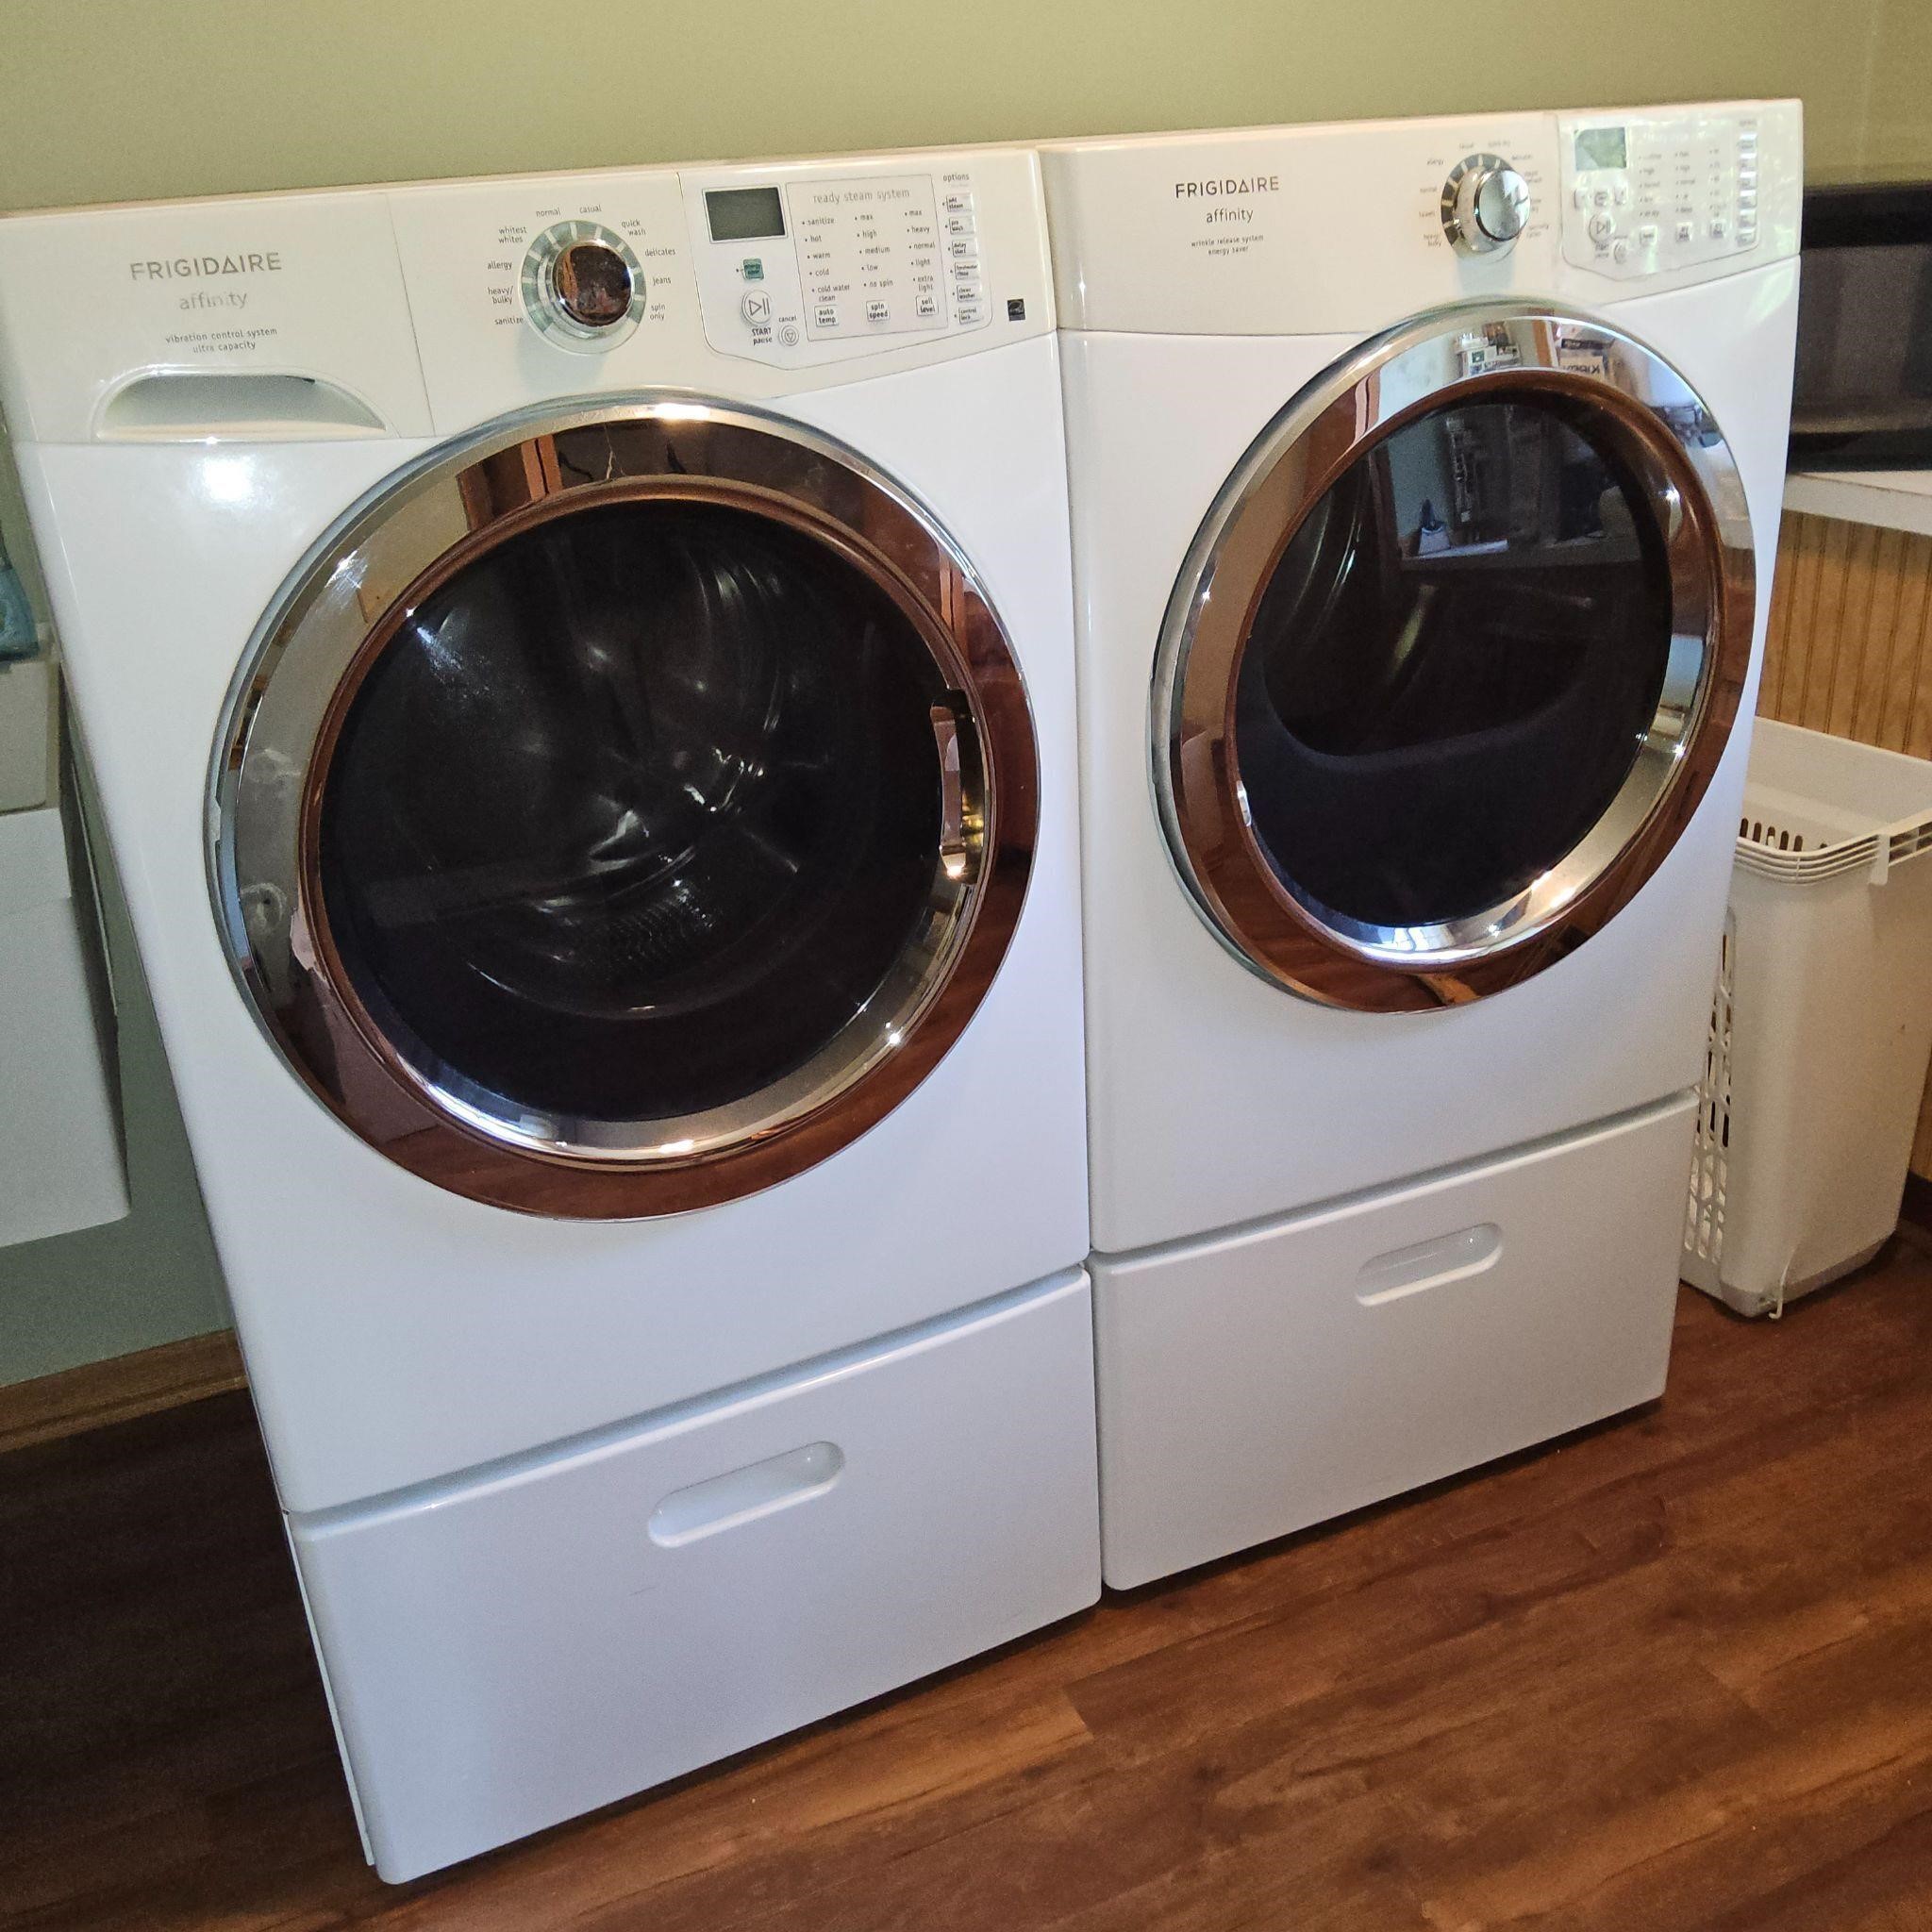 FRIGIDAIRE AFFINITY WASHER & DRYER WITH STANDS